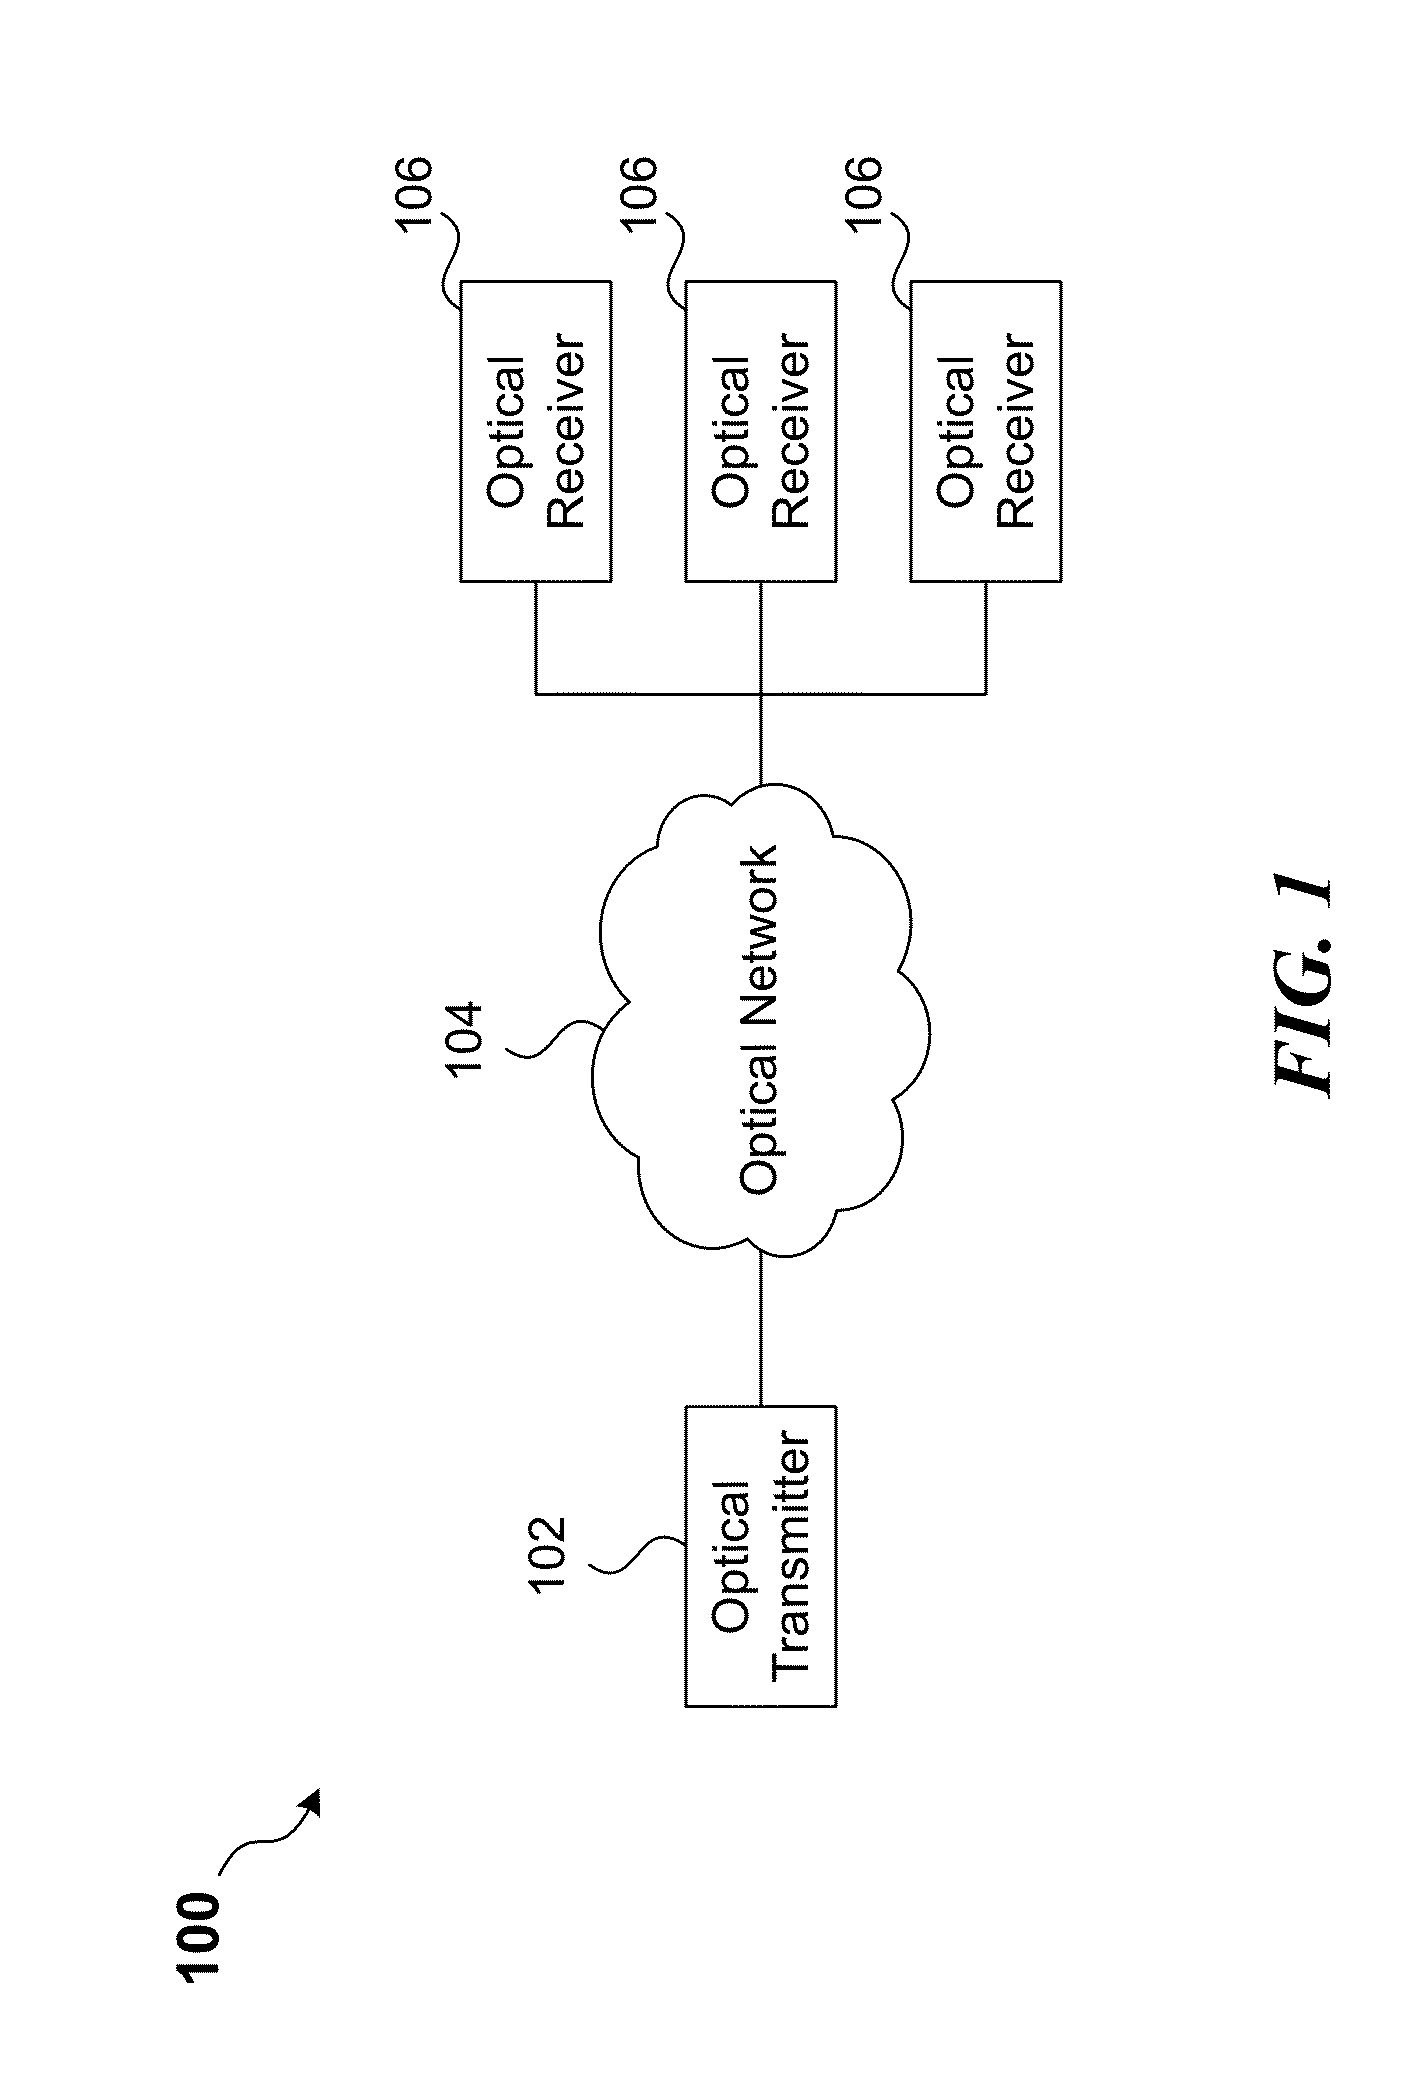 Blind equalization of dual subcarrier OFDM signals